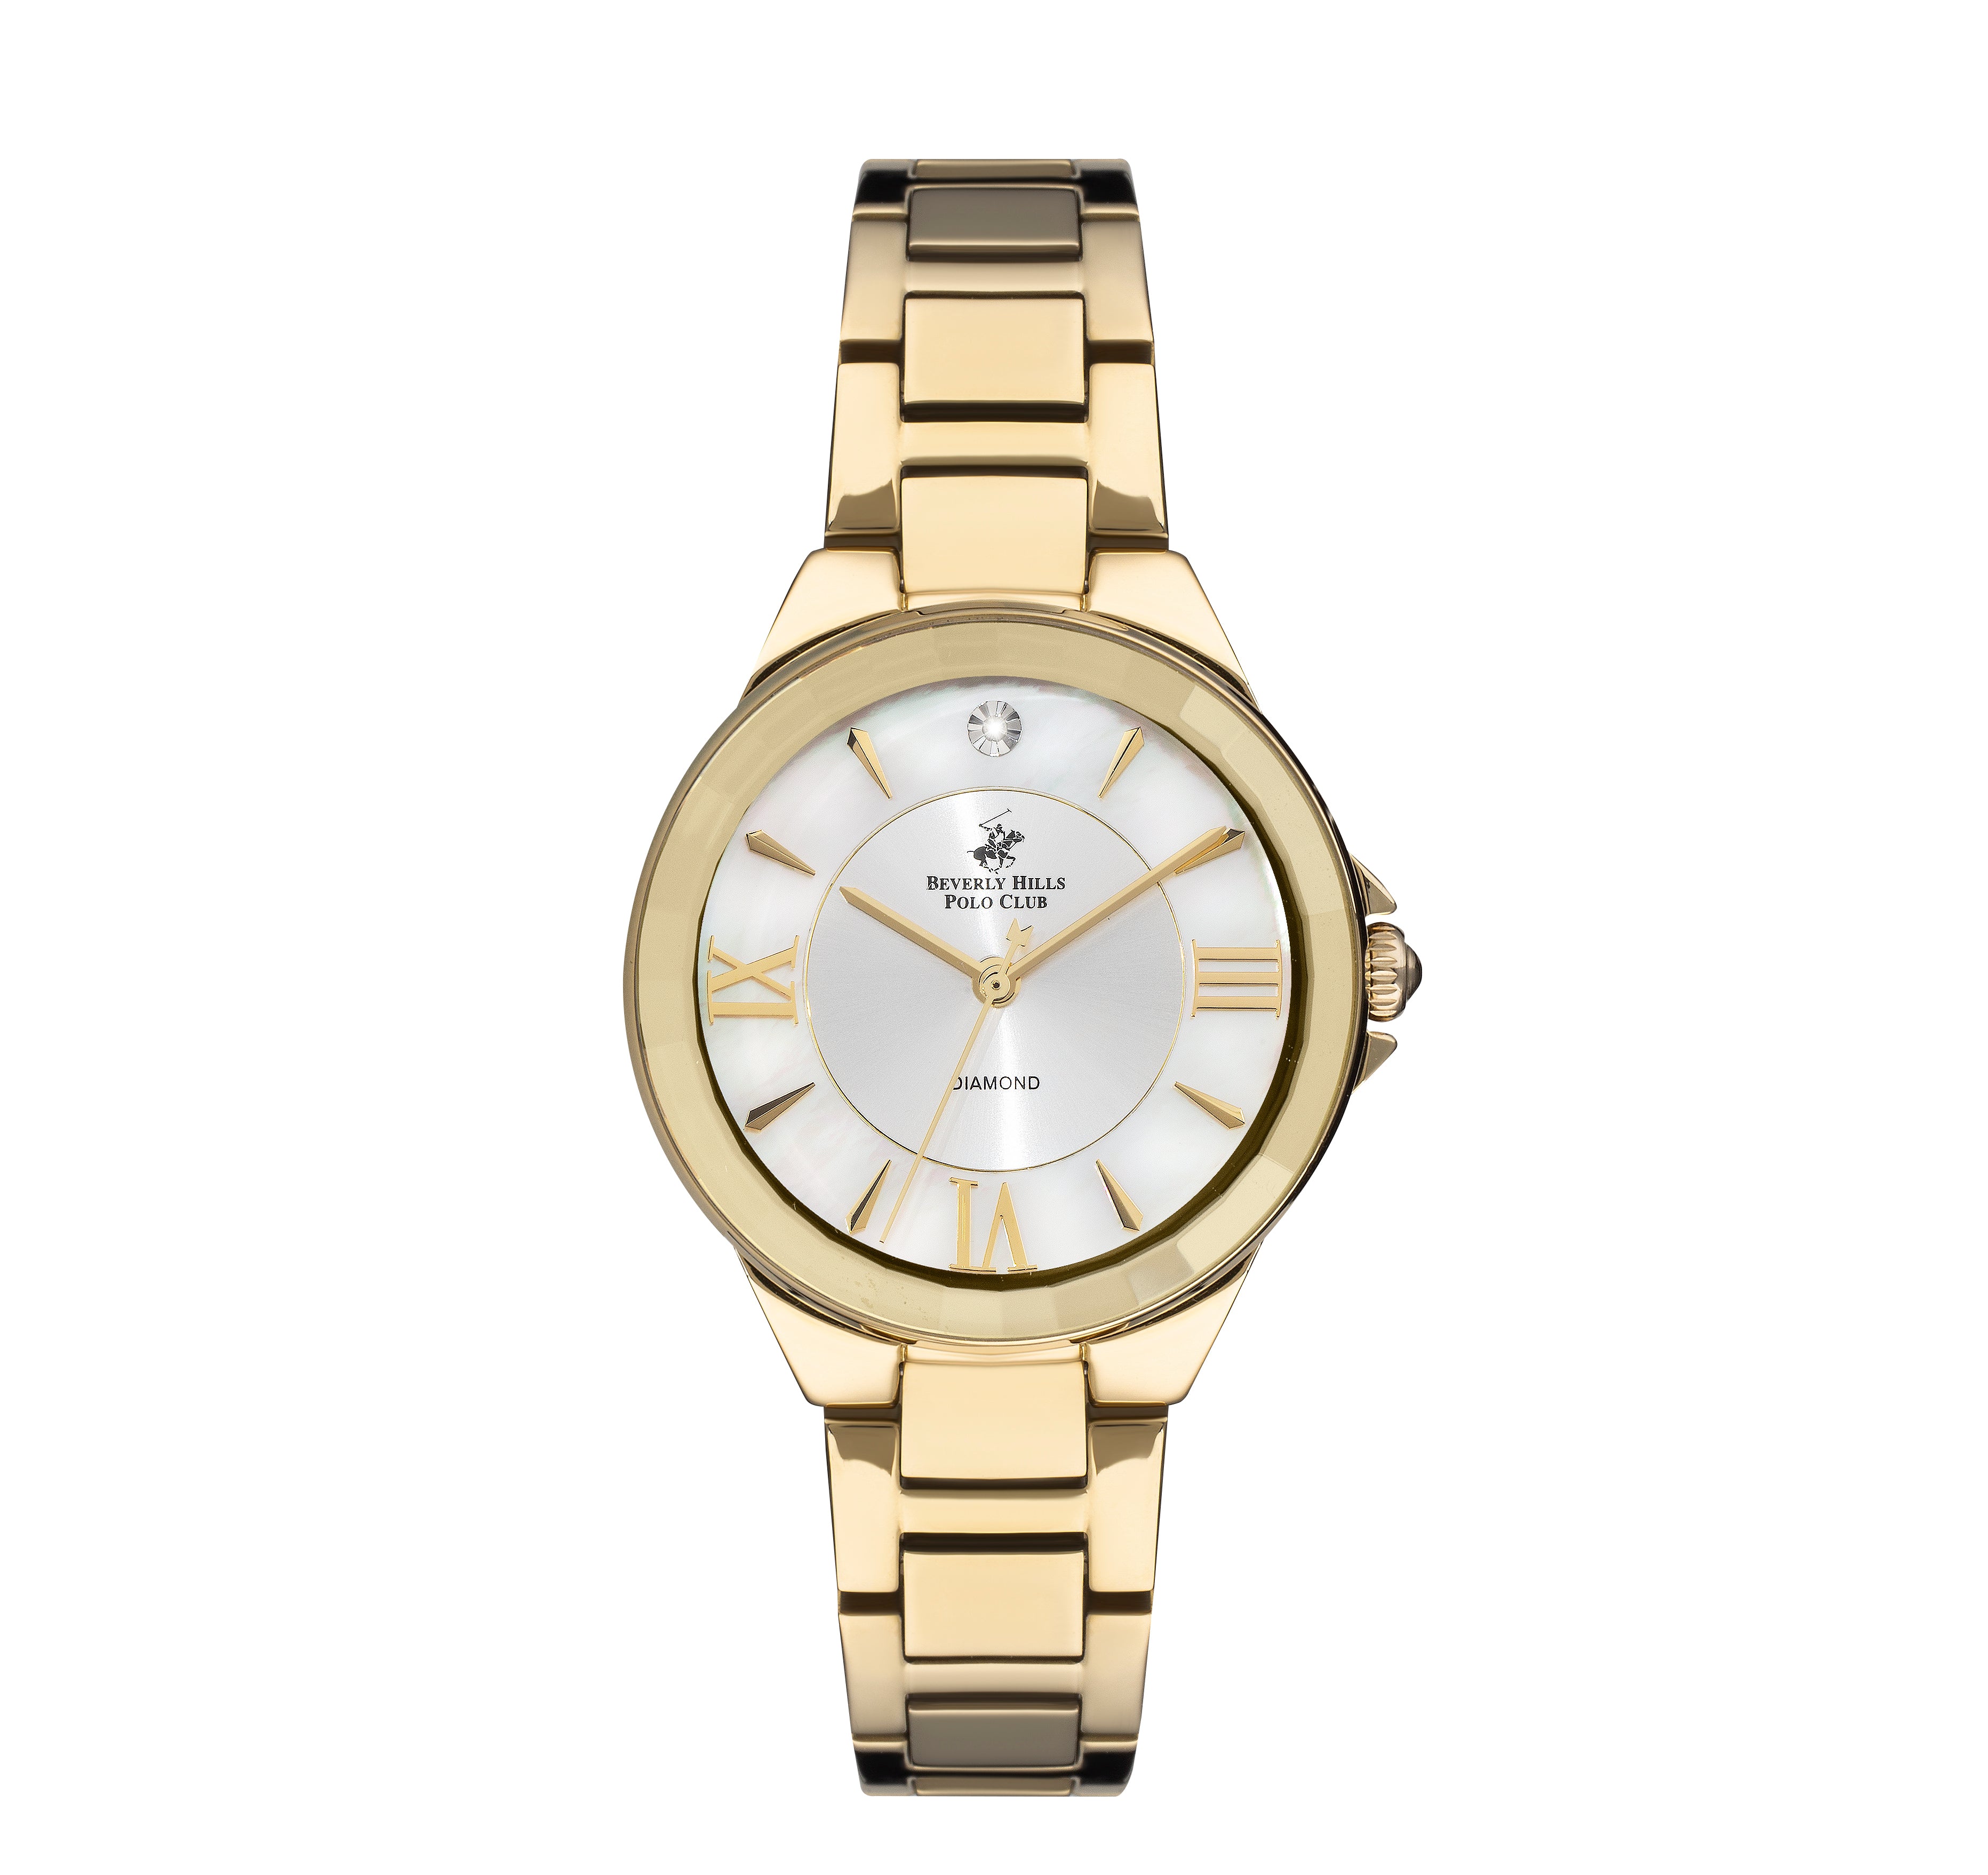 Polo - BP3228X.120 - Ladies Stainless Steel Watch